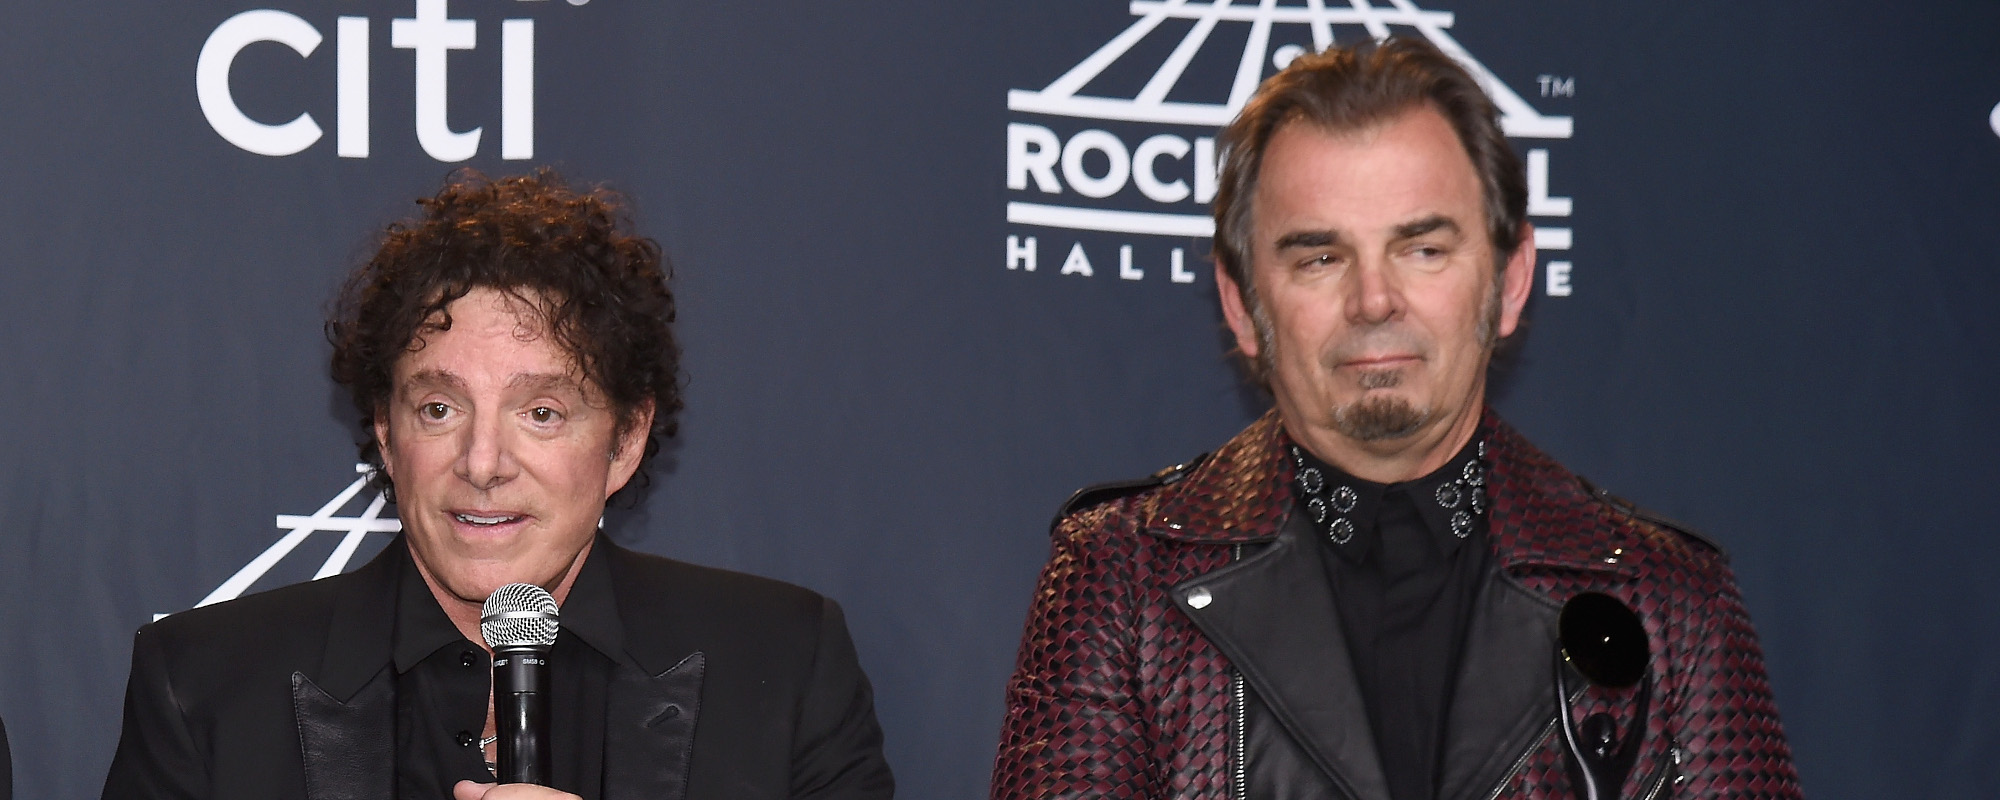 Neal Schon Sends Journey Bandmate, Jonathan Cain, Cease and Desist After Mar-A-Lago Performance